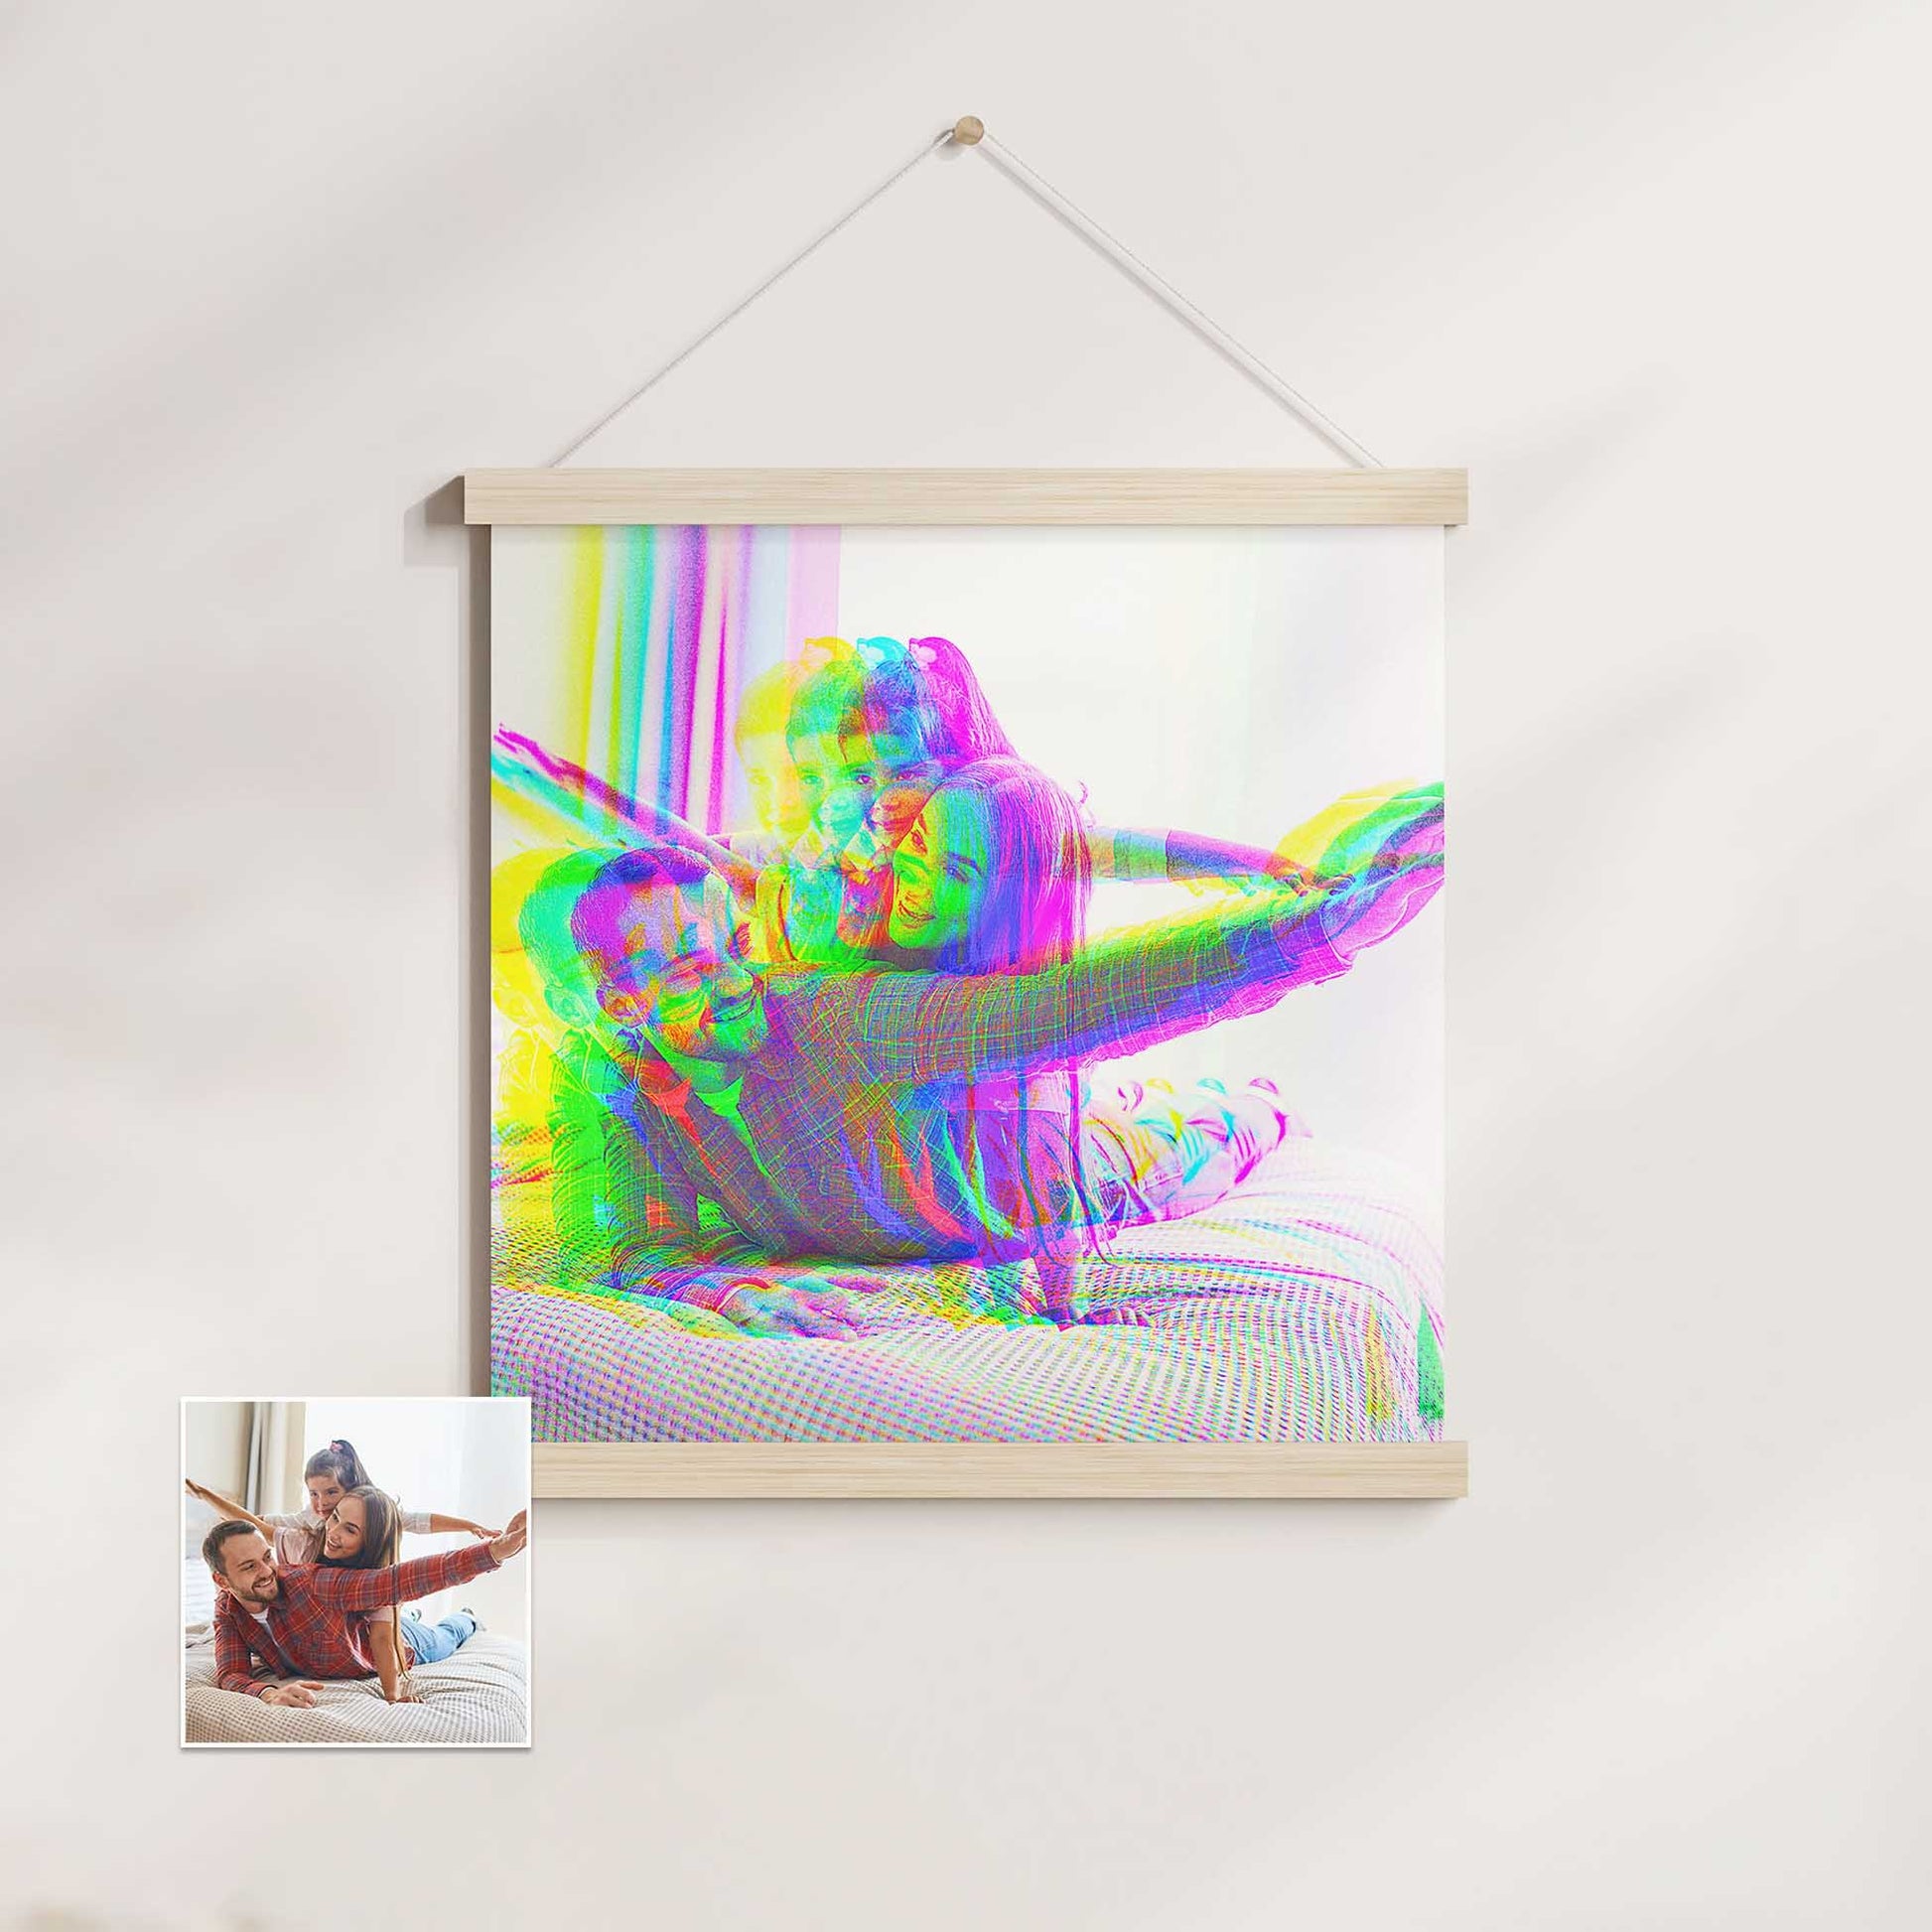 Add a touch of artistic flair to your space with the Personalised Anaglyph 3D Poster Hanger. This unique wall art showcases your favorite photos with a stunning 3D effect, enhanced by the beautiful purple and green hues